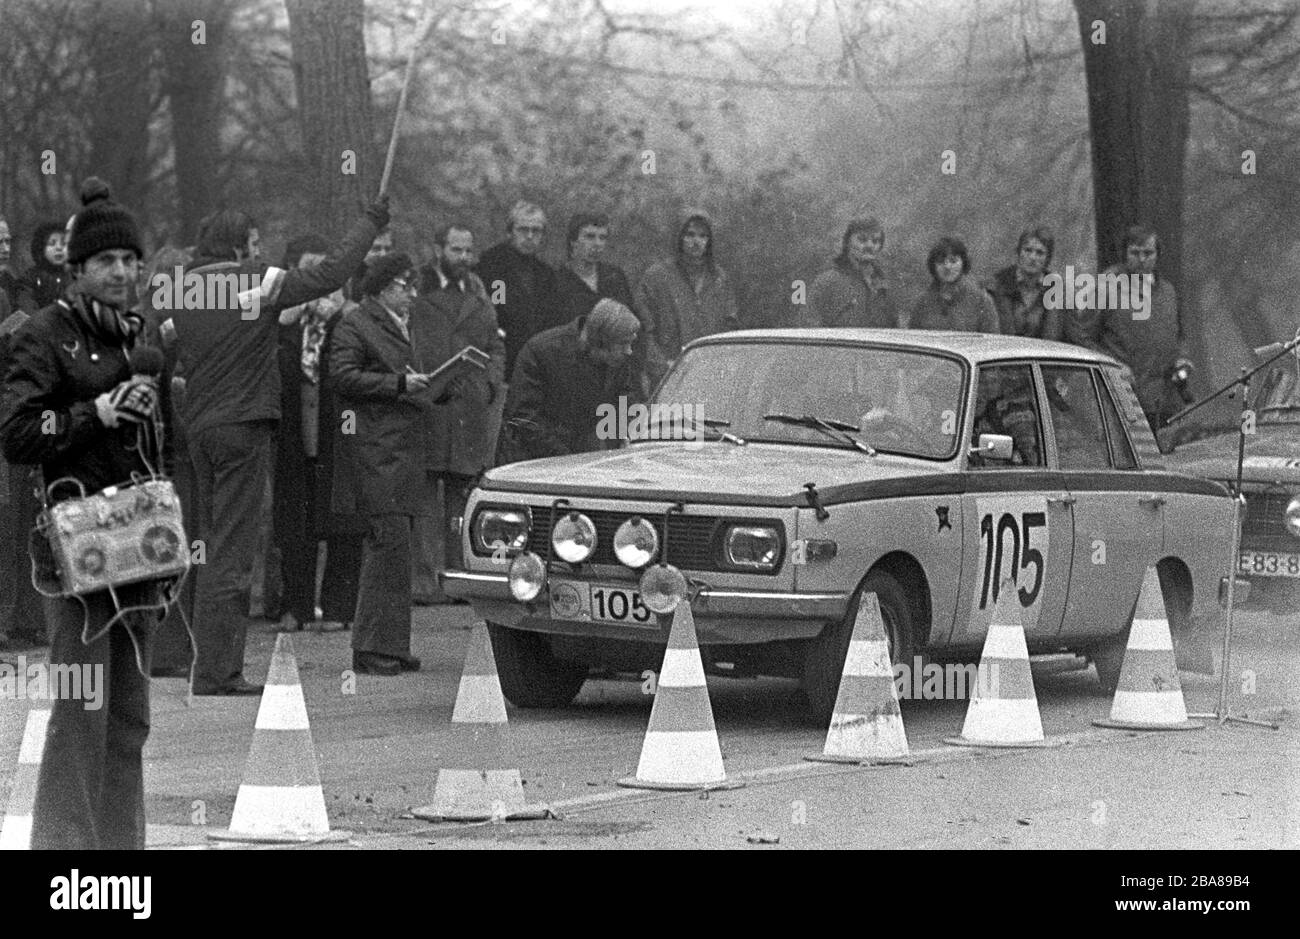 30 November 1977, Saxony, Leipzig: The fair rally in Leipzig, here in 1978 in the Clara-Zetkin-Park, is a motorsport highlight in the GDR motorsport calendar. The picture shows a Wartburg 353 at the start. On the left, a radio reporter from Radio DDR Sender Leipzig with a tape recorder. The exact date of the recording is not known. Photo: Volkmar Heinz/dpa-Zentralbild/ZB Stock Photo